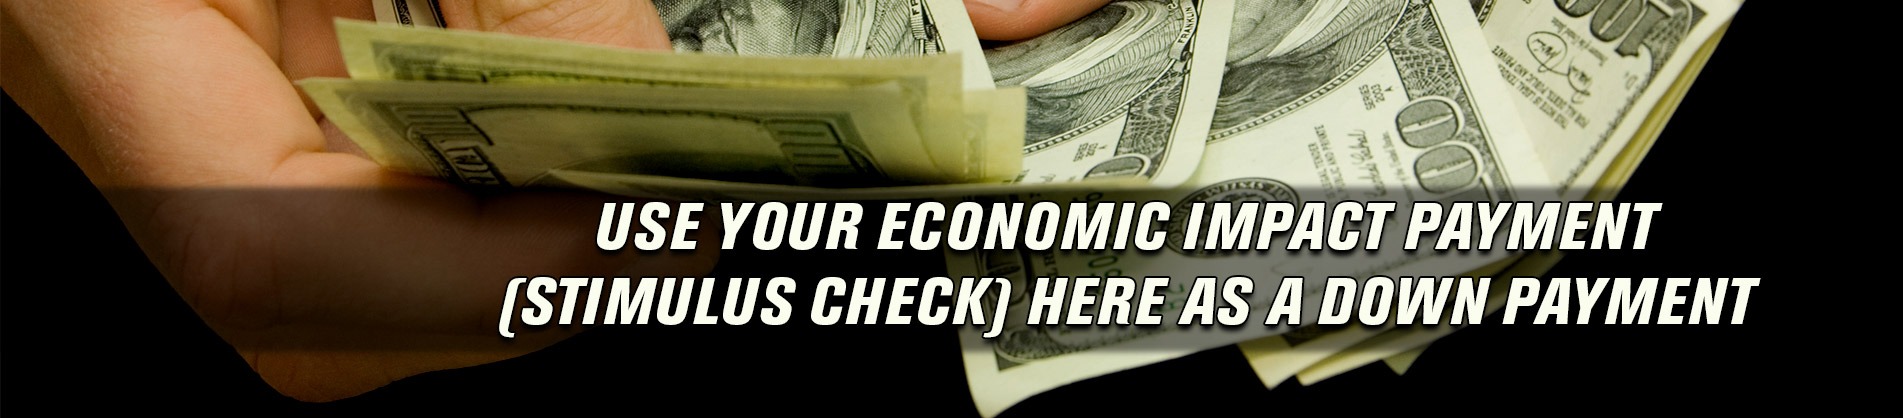 Use your Economic Impact Payment(Stimulus Check) here as a down payment